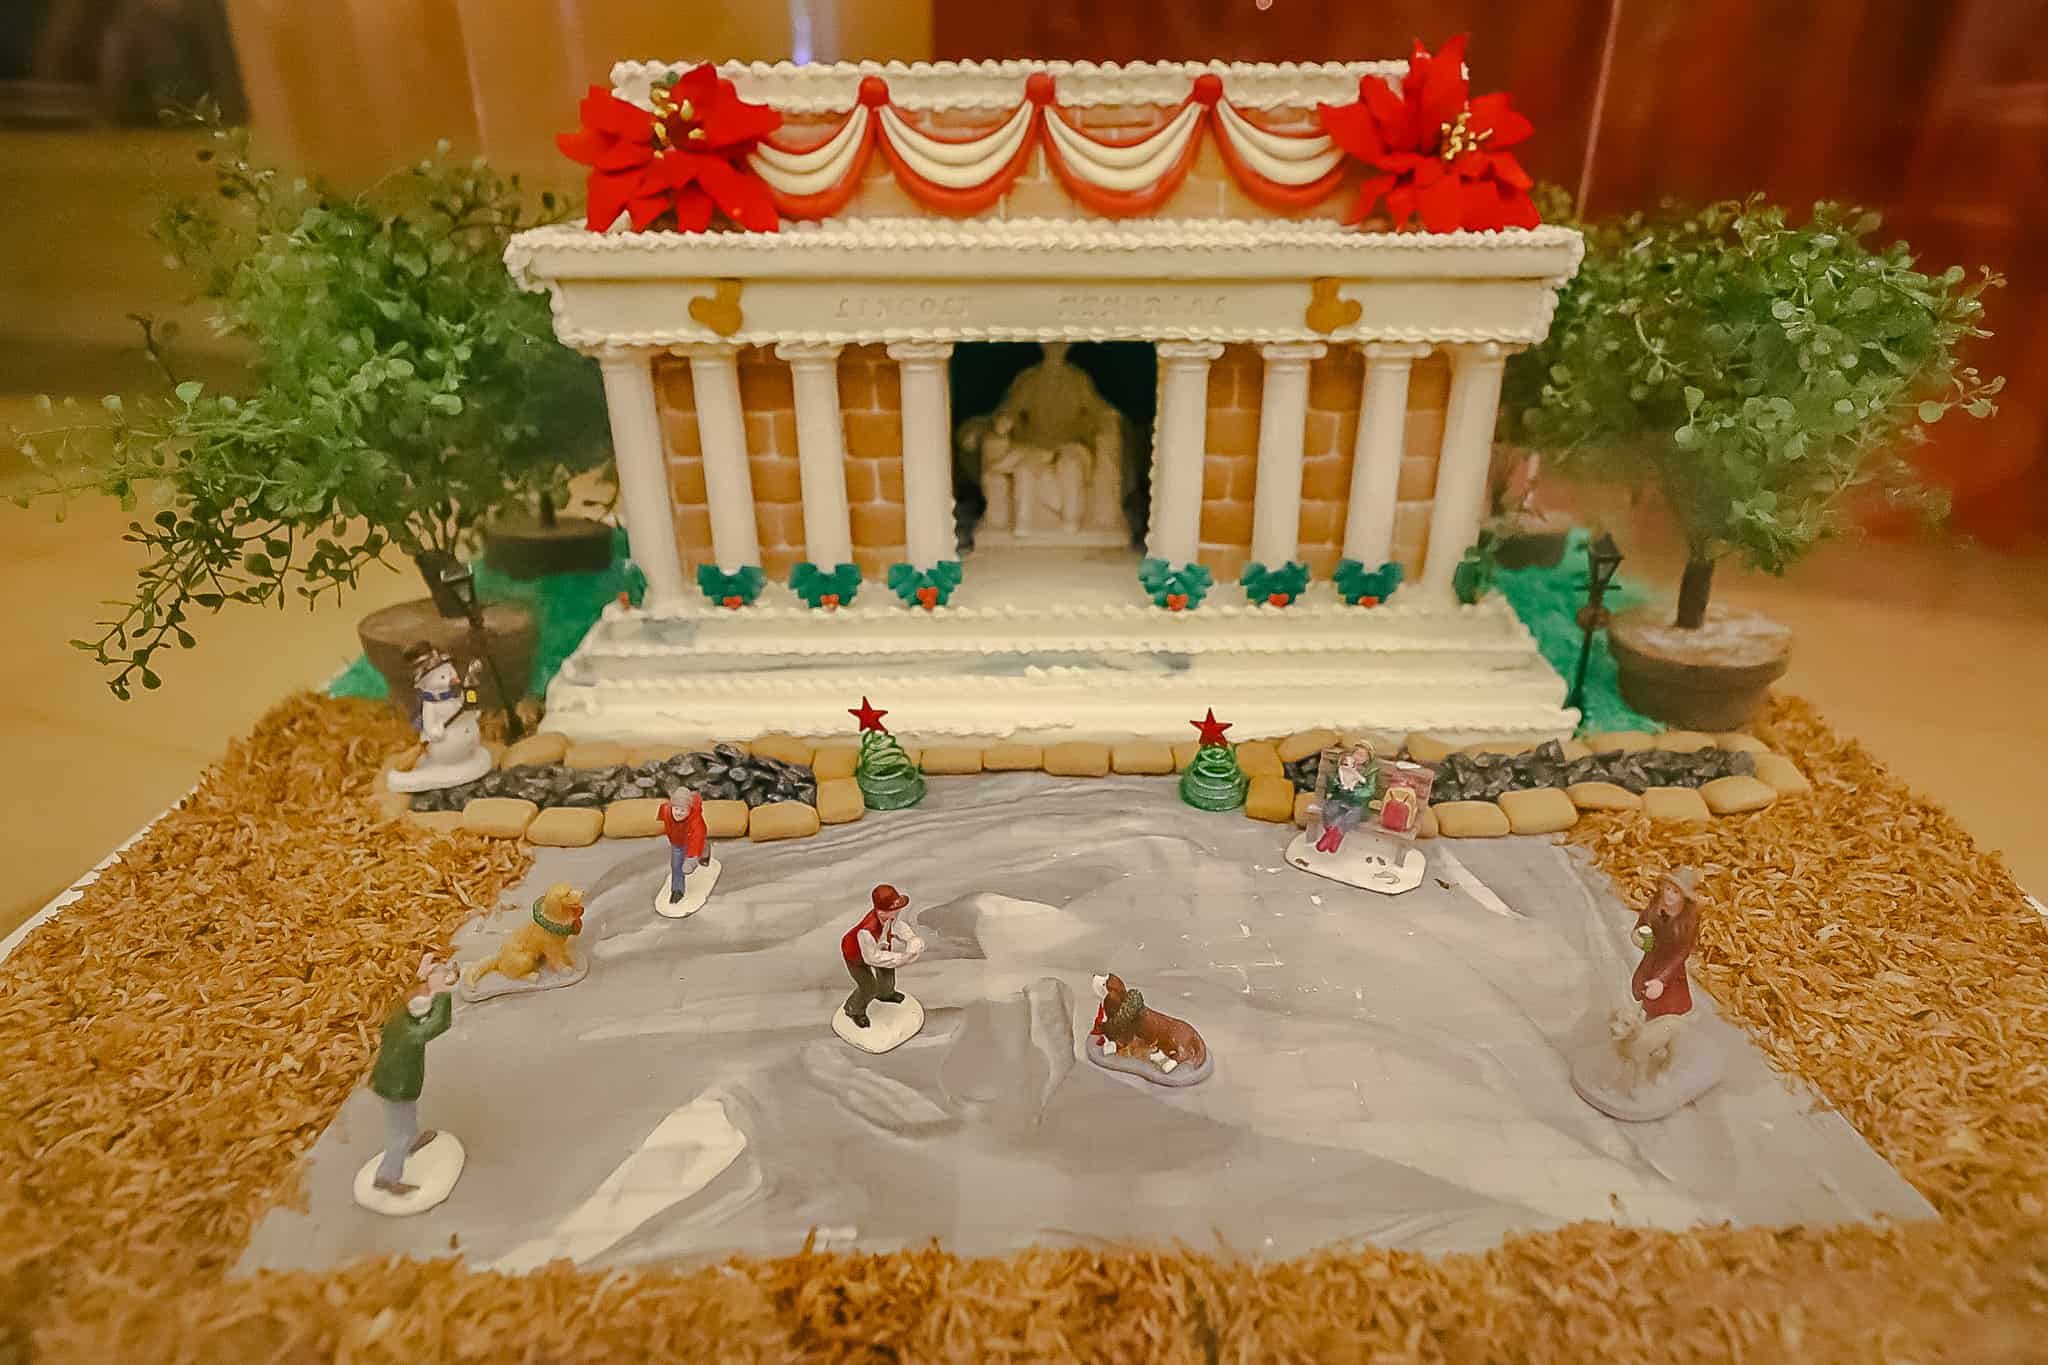 Epcot's gingerbread display that's made to look like the Lincoln Memorial. 